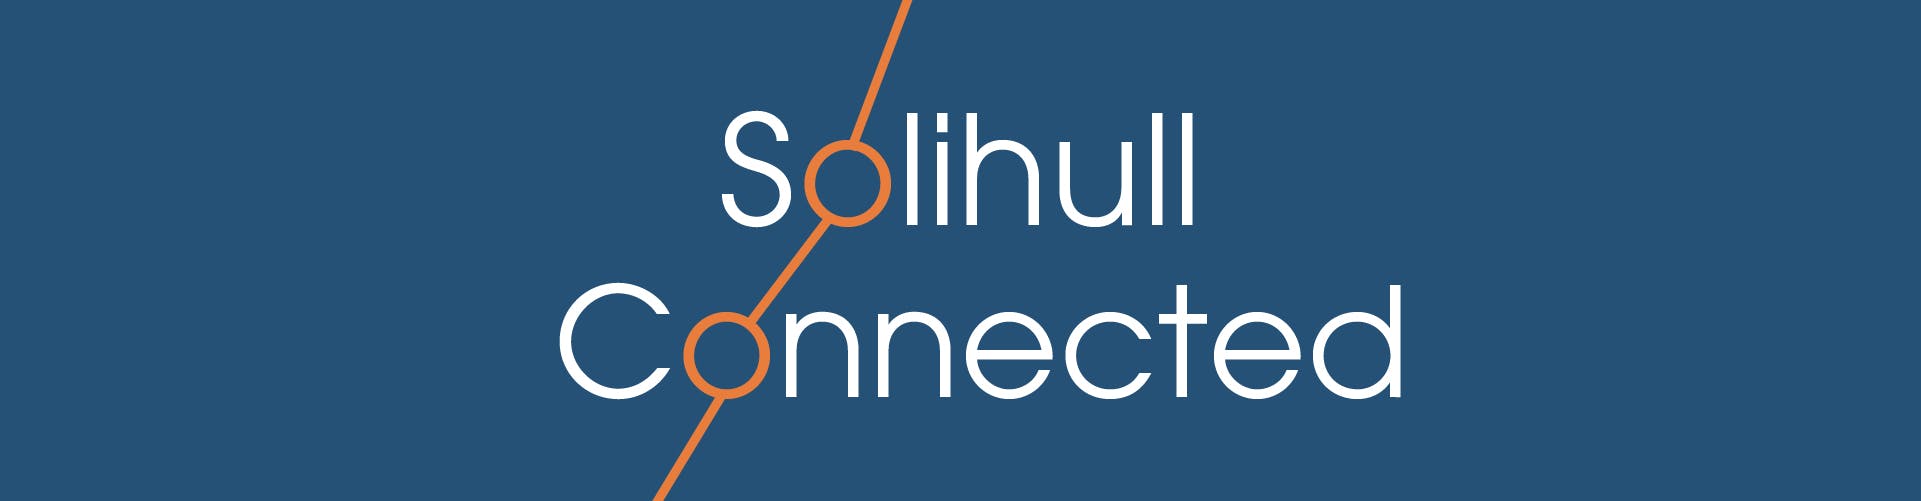 Solihull Connected logo